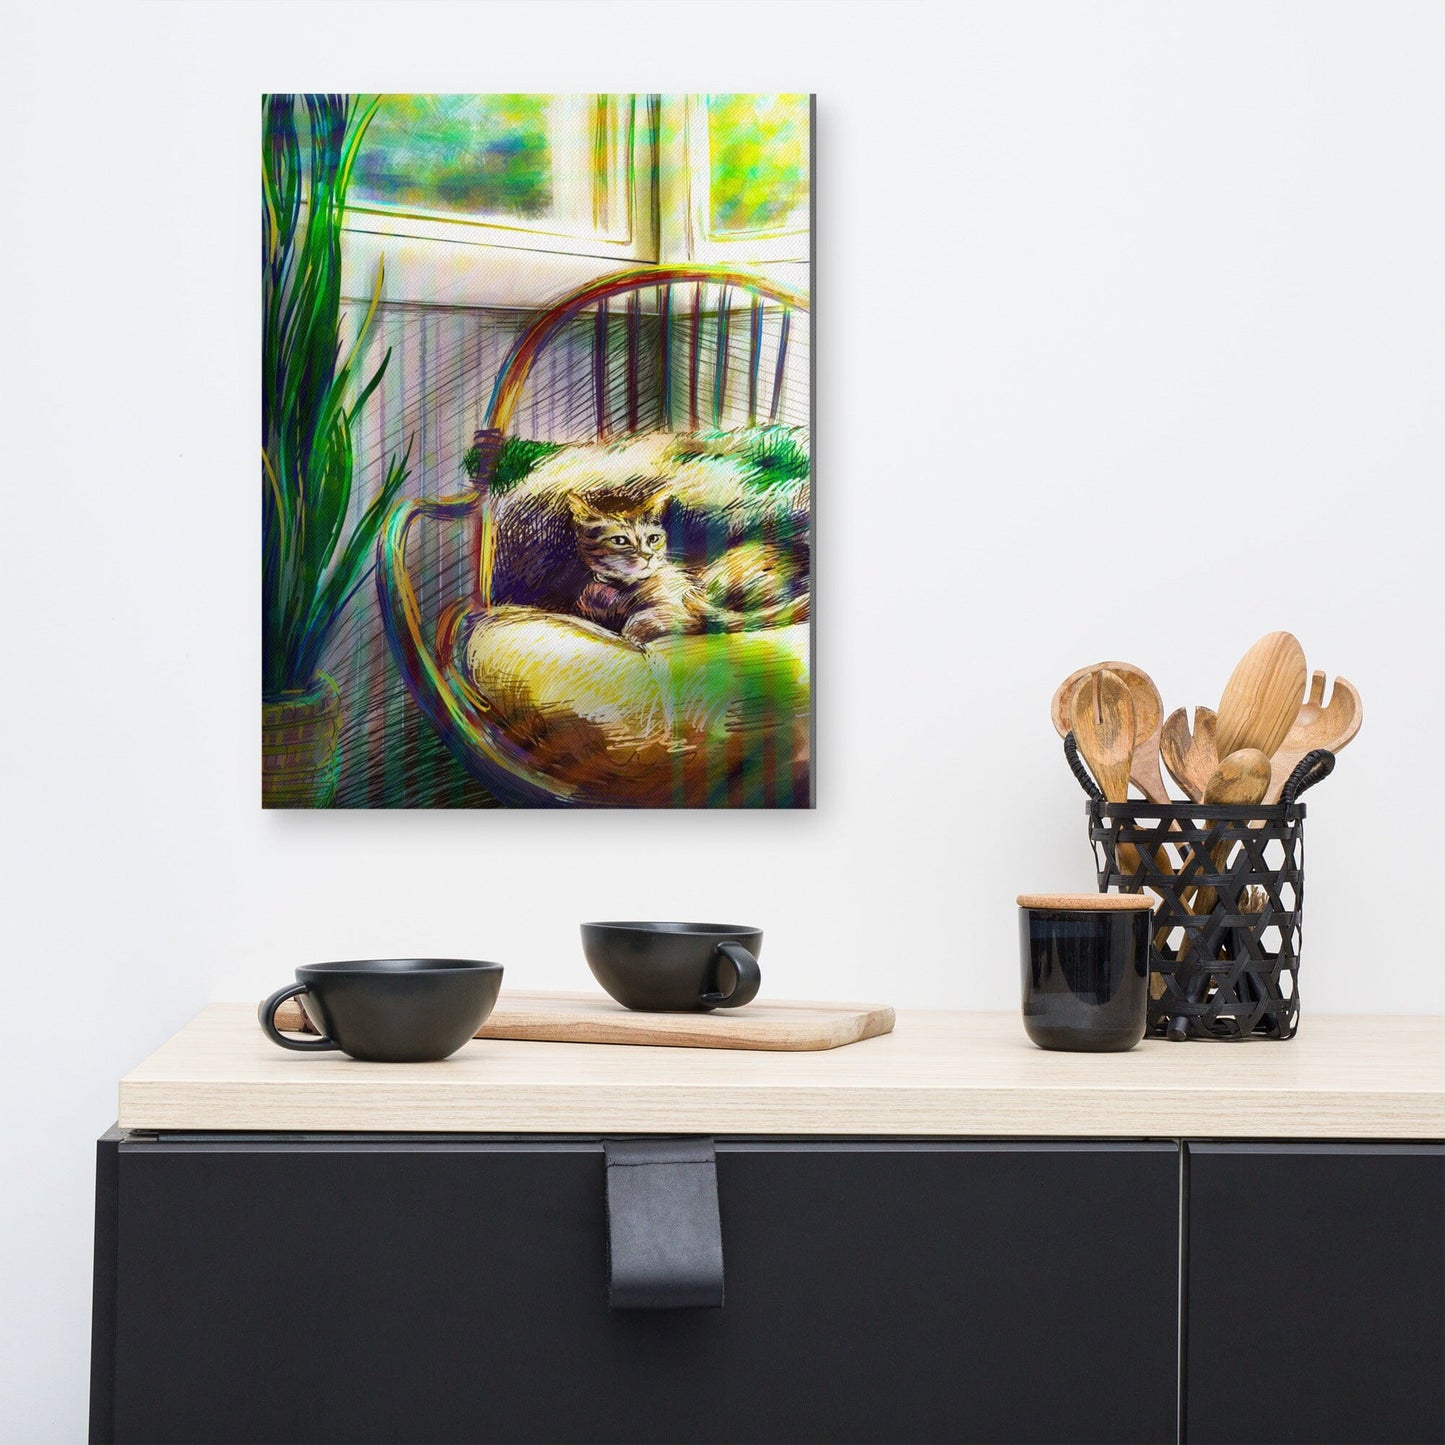 "Cozy Cat": Painting of a Cat in a Sunny Chair [Unfoiled] Posters, Prints, & Visual Artwork JoyousJoyfulJoyness 